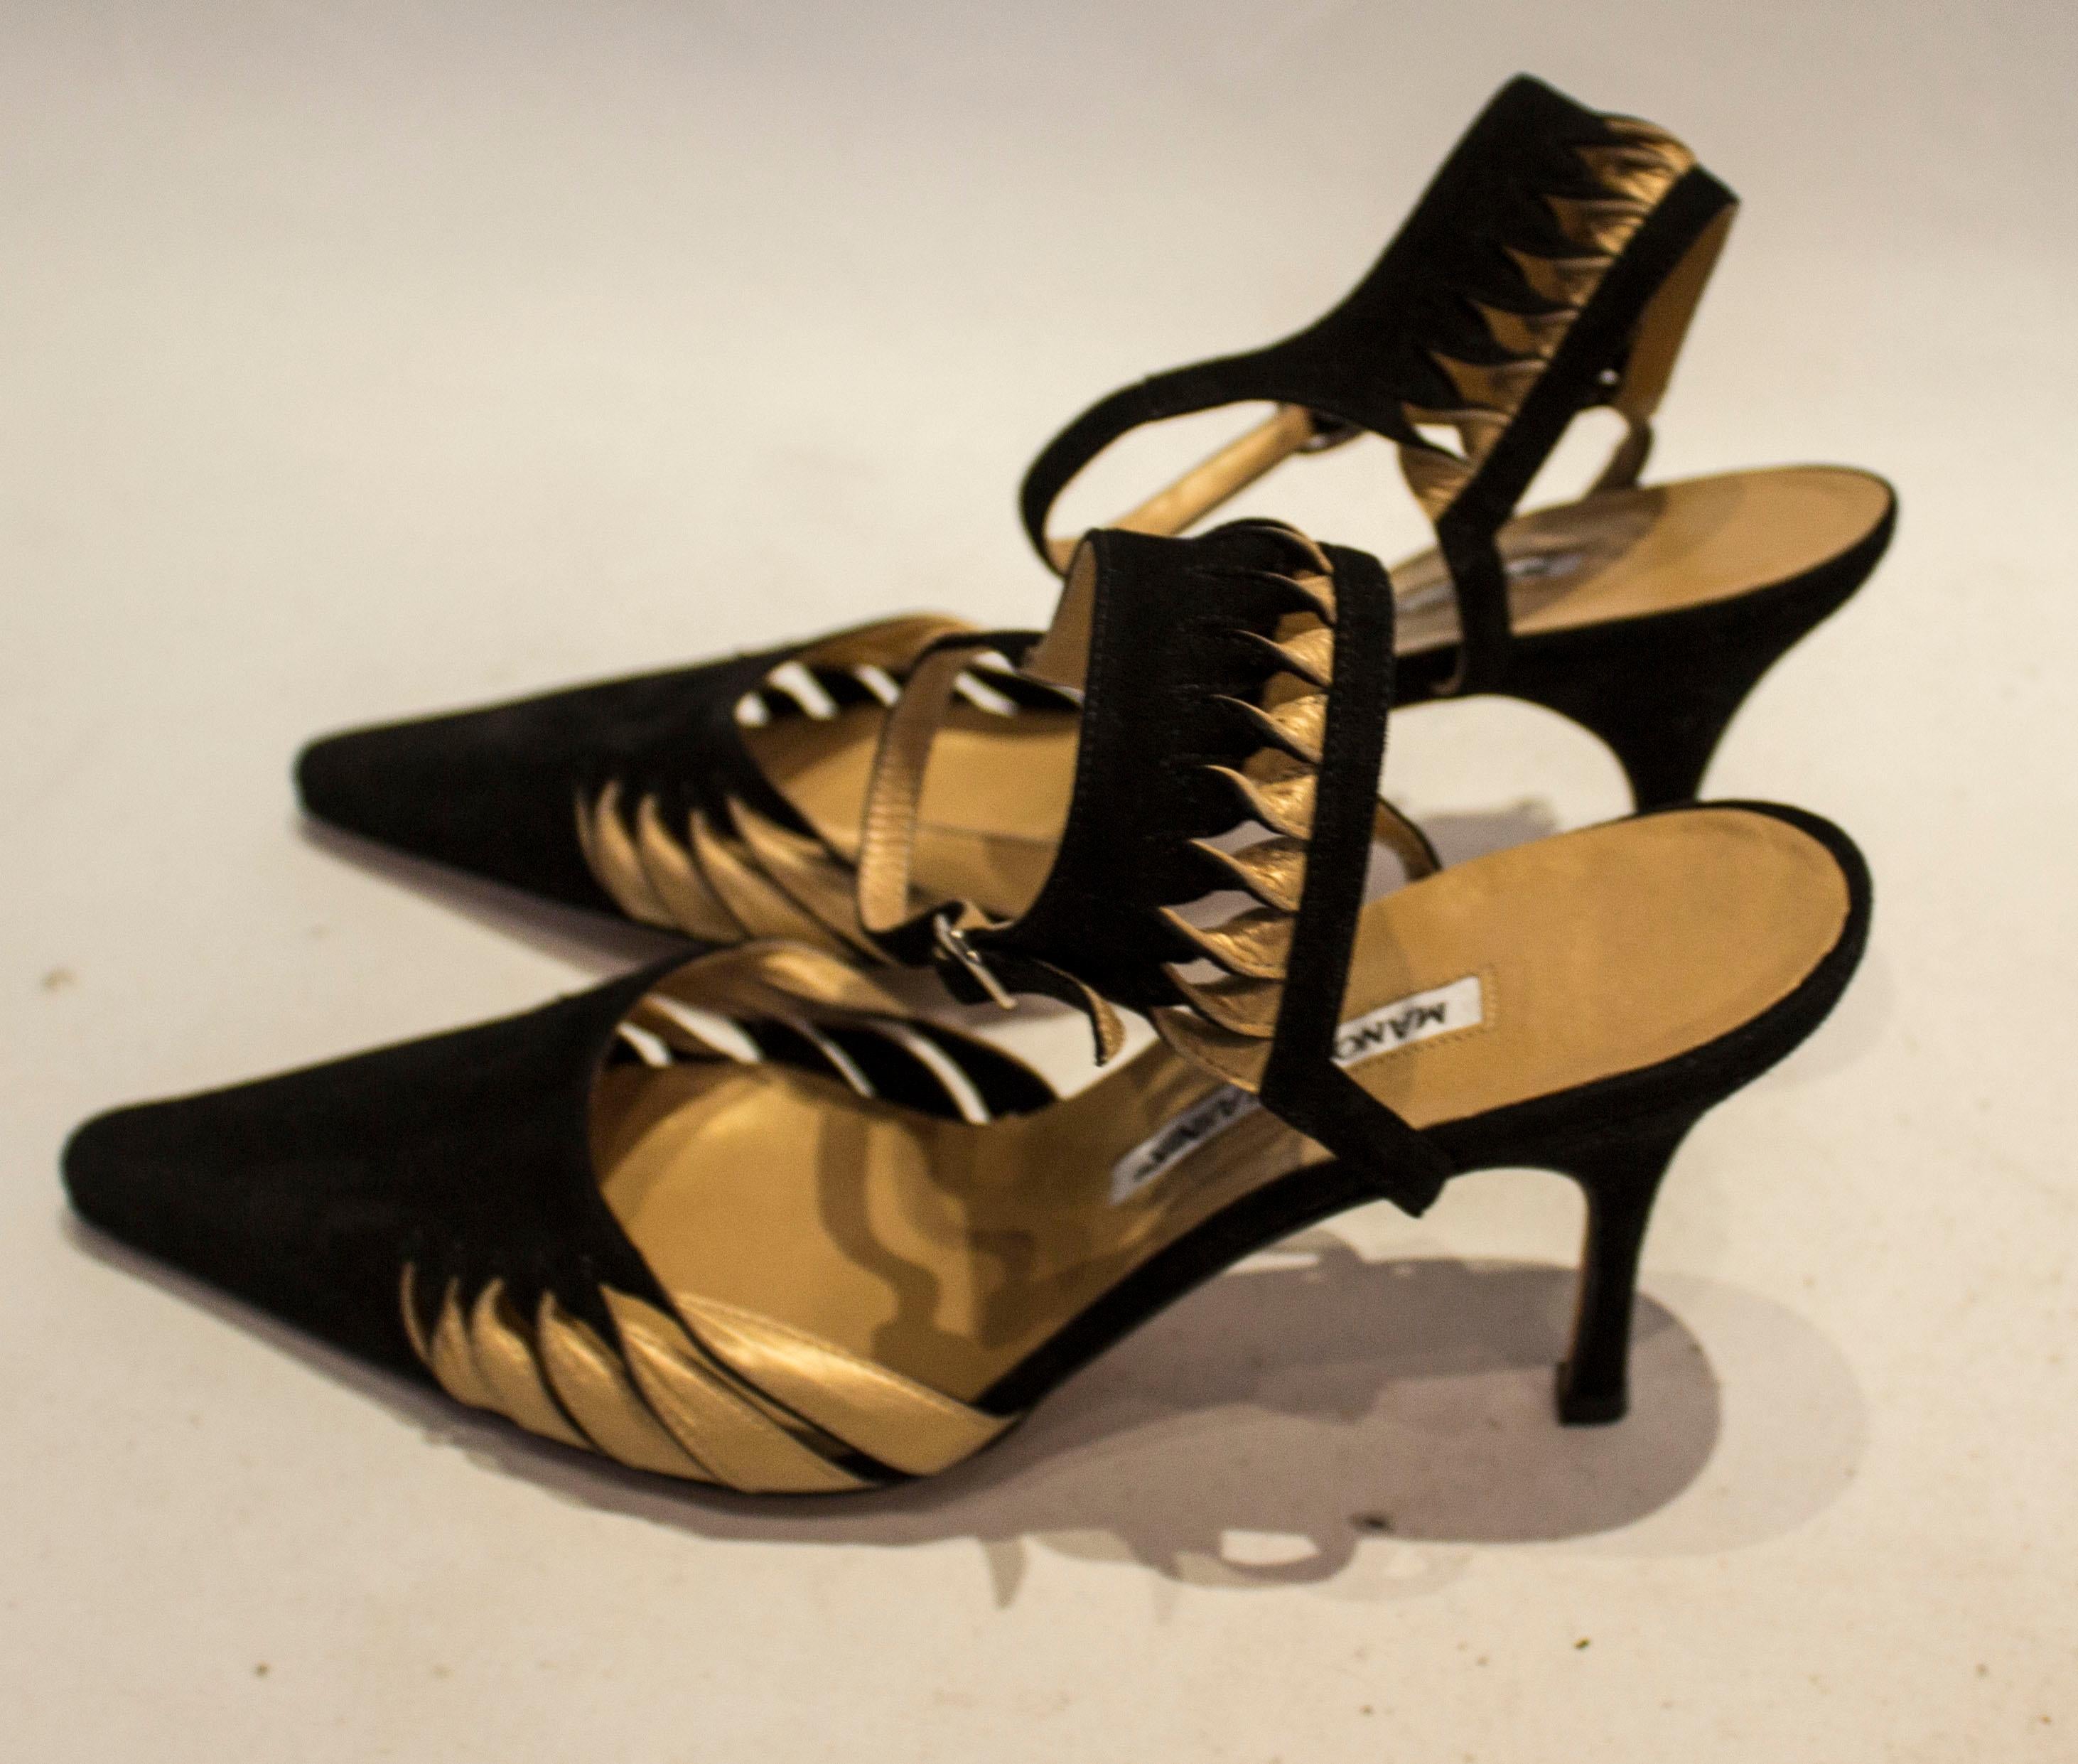 A chic pair of shoes , in black suede and gold leather. The shoes have an attractive ankle strap , are lined in gold leather and have a 4'' heel. Marked size 39 1/2.